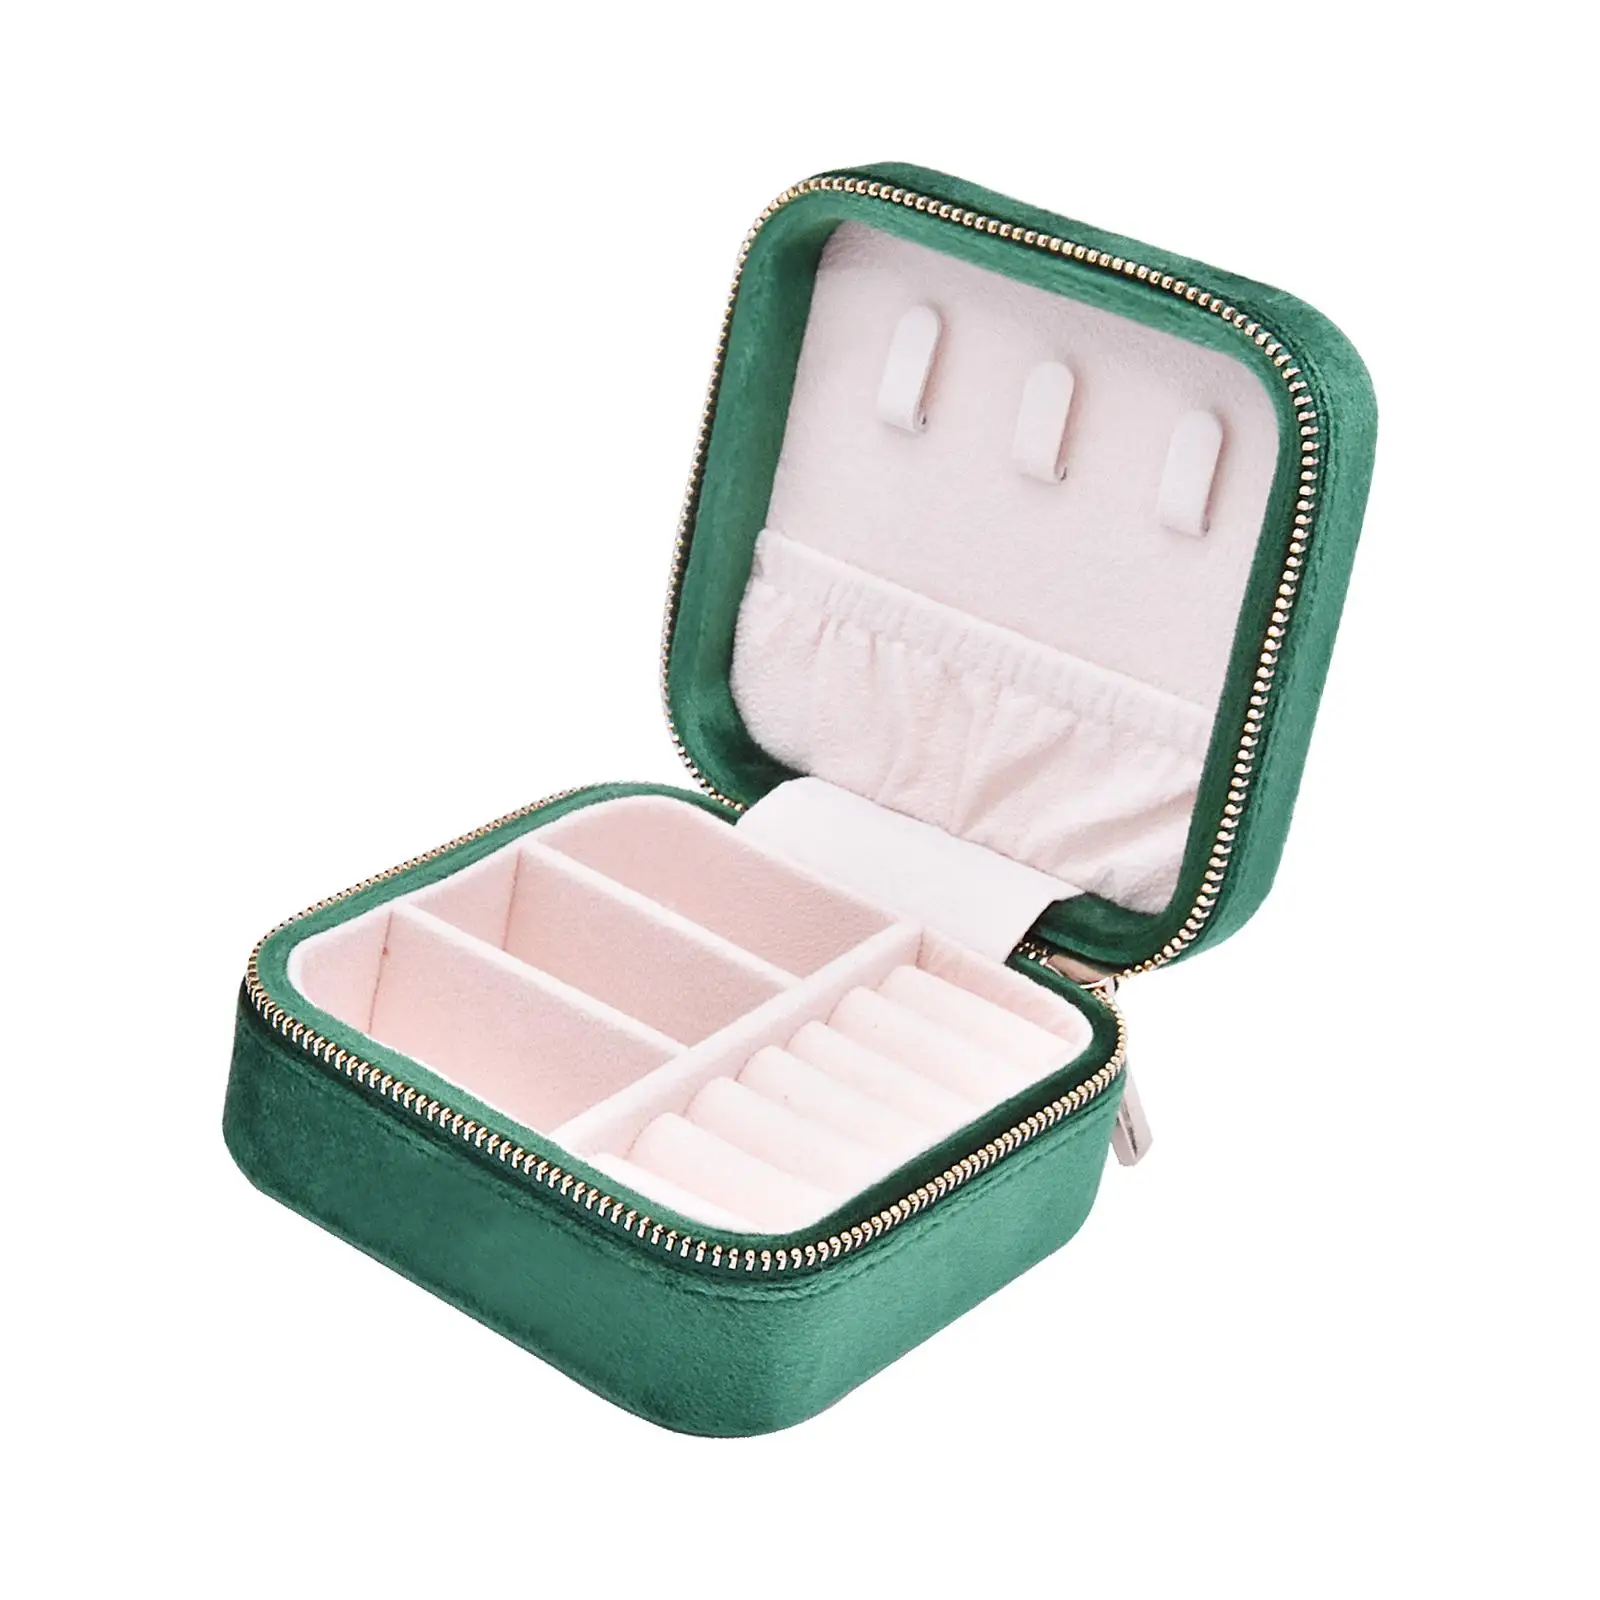 Jewelry Storage Box Zipper Double Layer Velvet Portable Display Holder Boxes Storage Case Collection Box Small for Girls Women